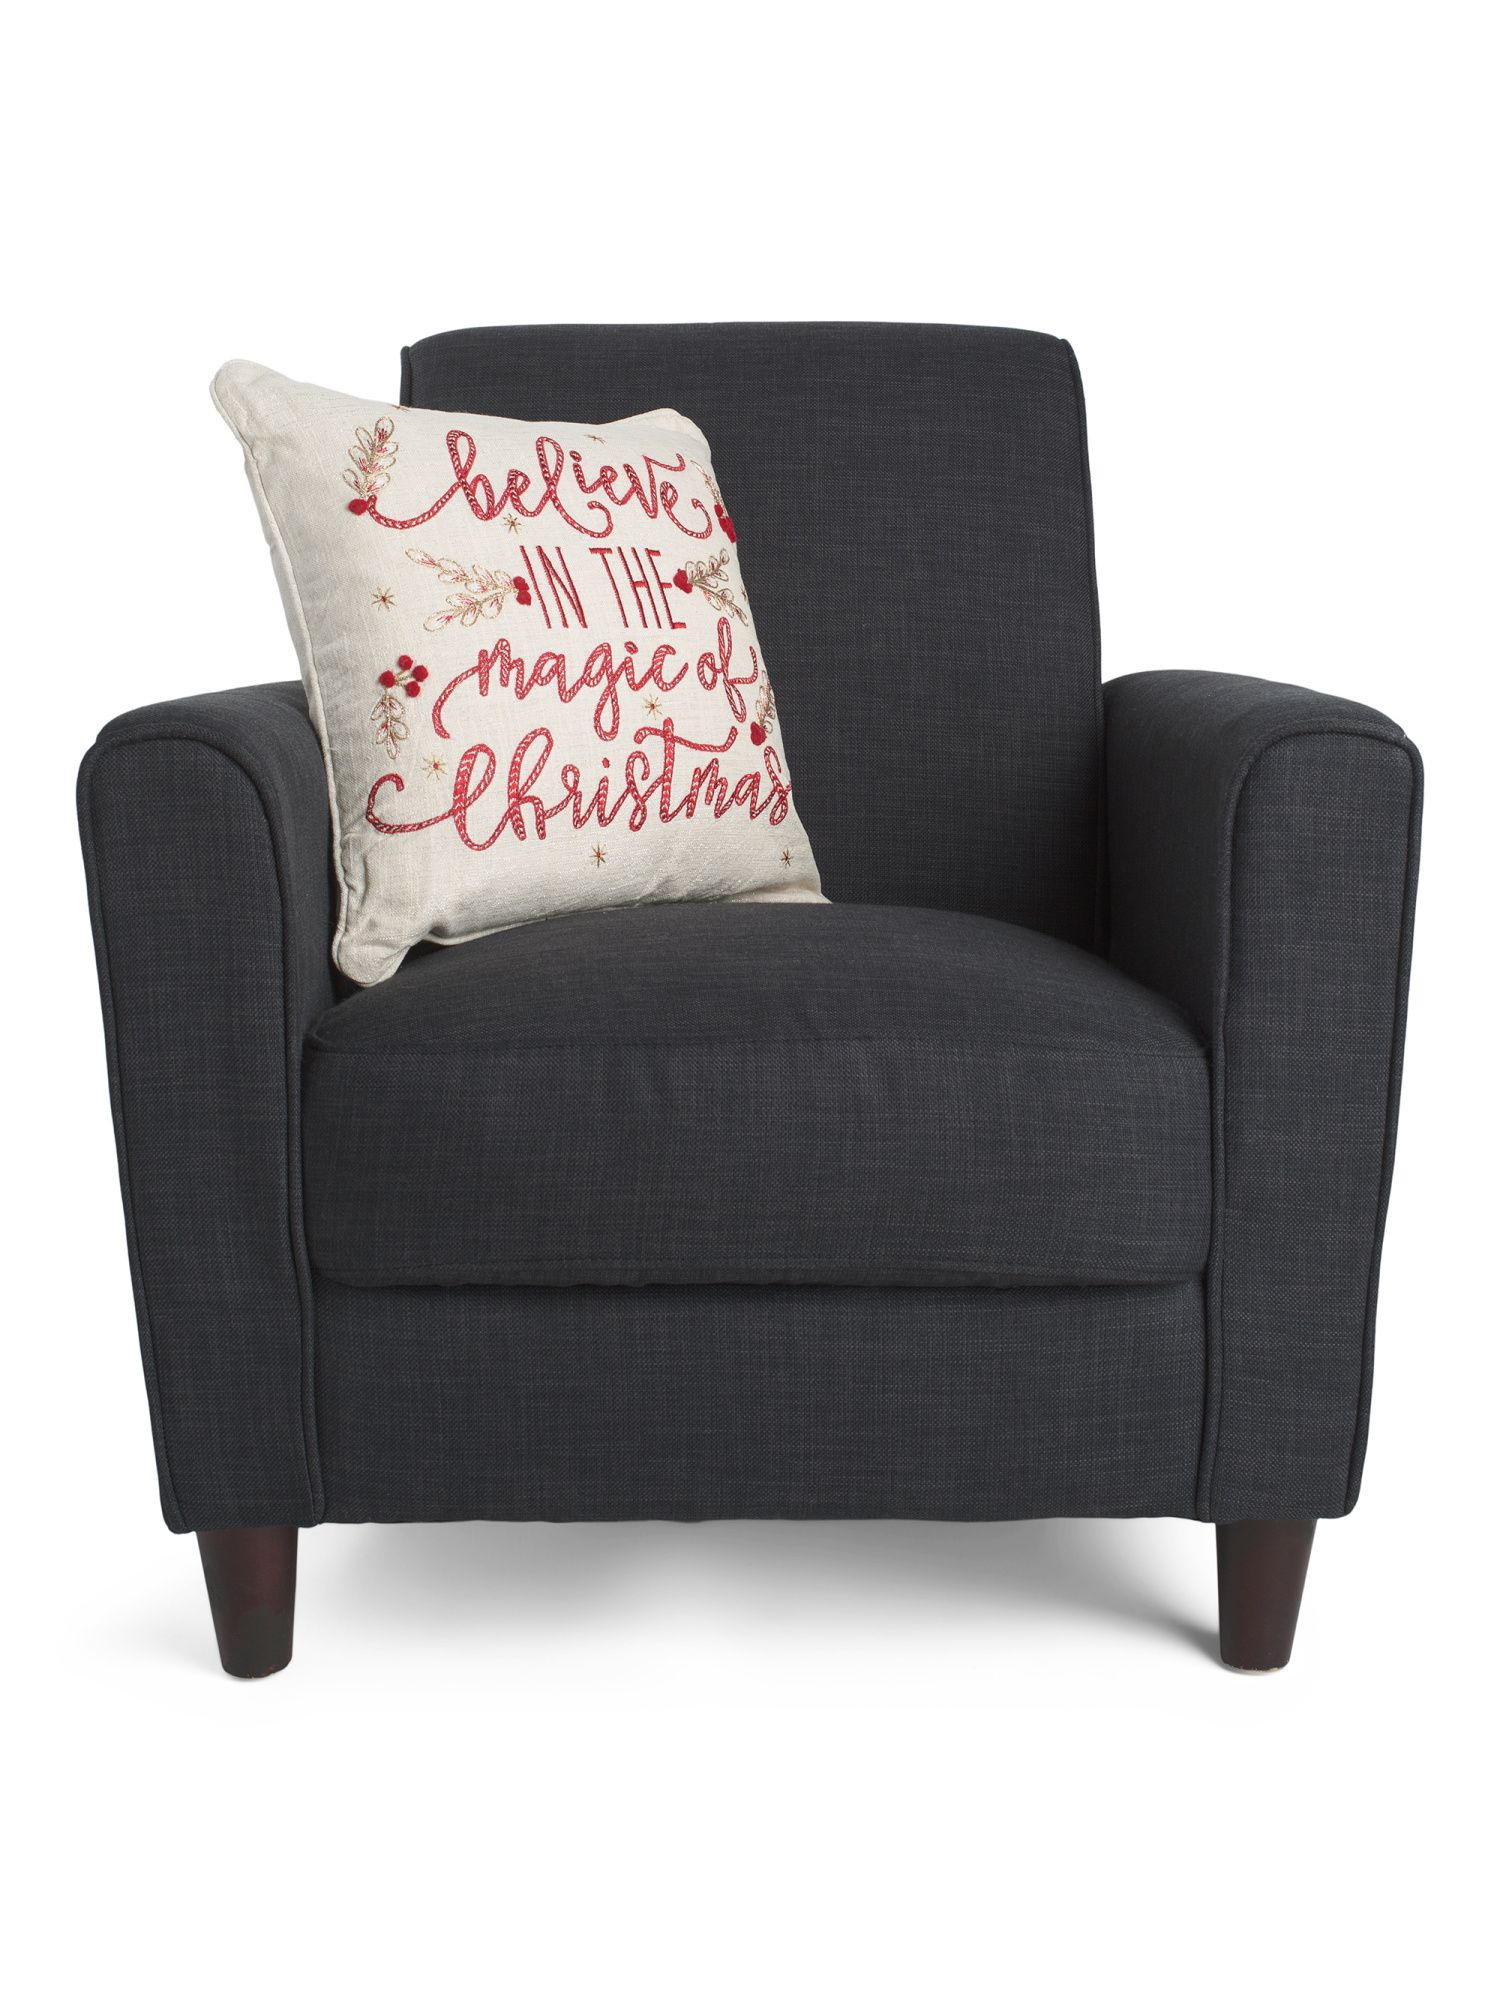 18x18 Believe In The Magic Of Christmas Pillow | TJ Maxx